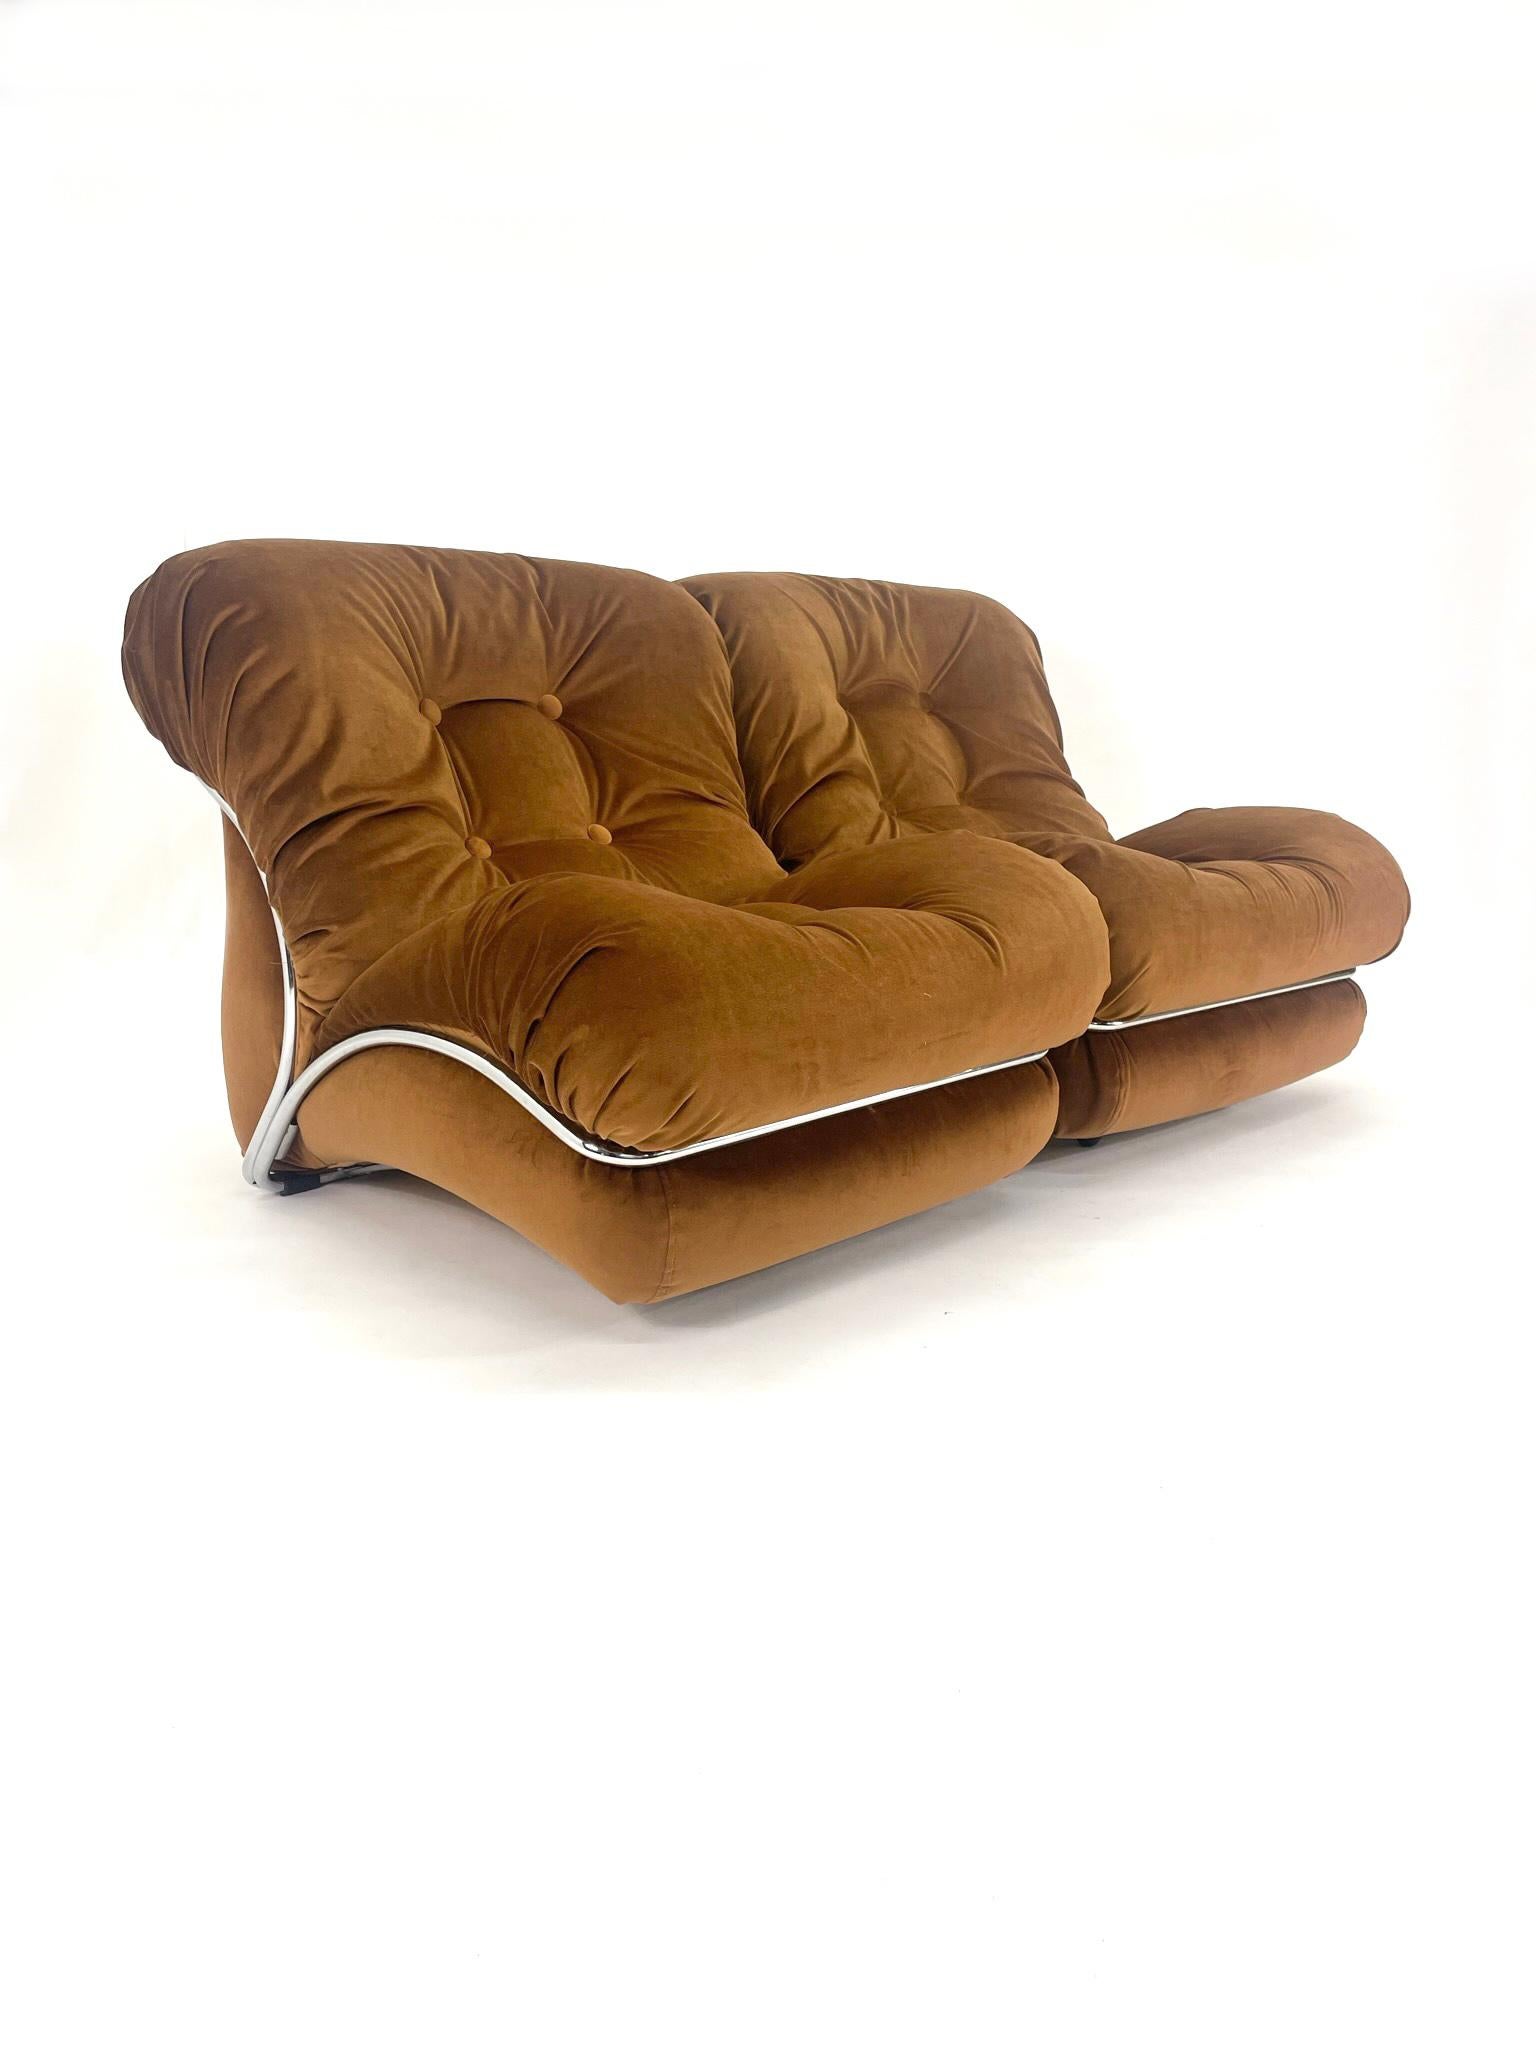 I.P.E. 'Corolla' Lounge Chair (2 available) For Sale 5